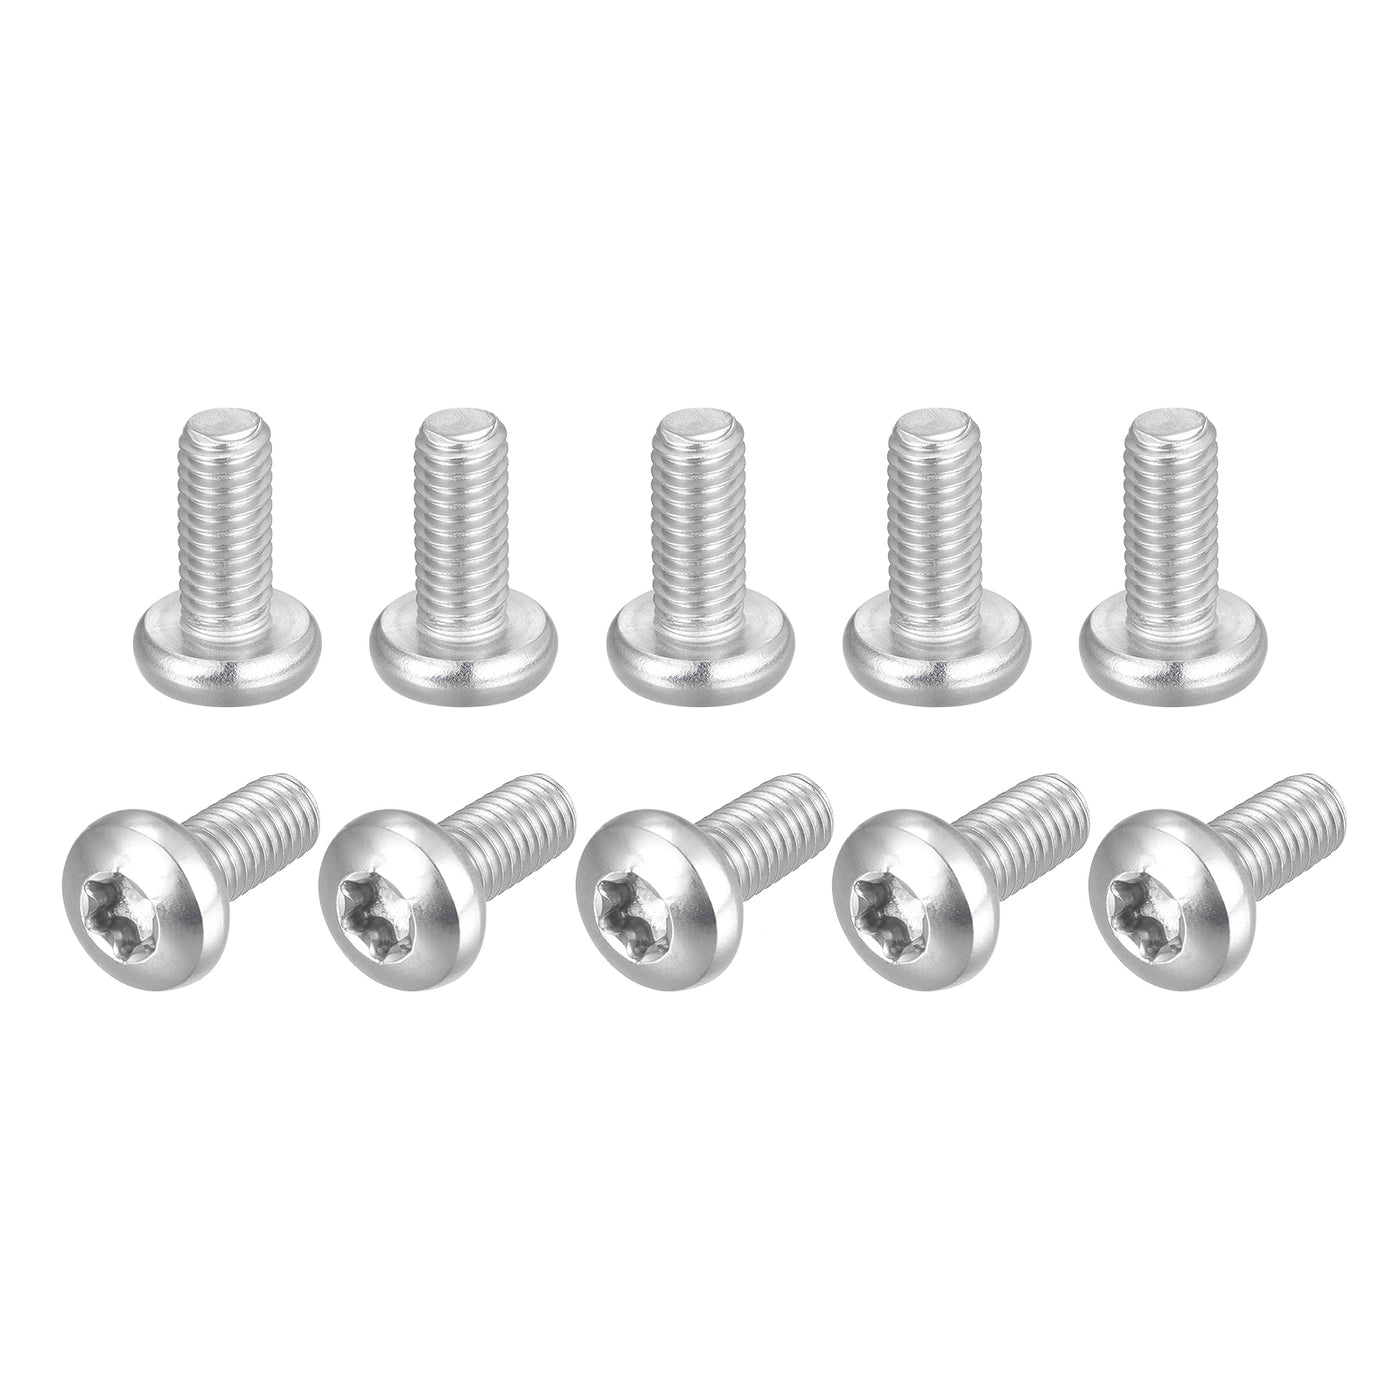 uxcell Uxcell M6x14mm Torx Security Machine Screws, 10pcs 316 Stainless Steel Pan Head Screw